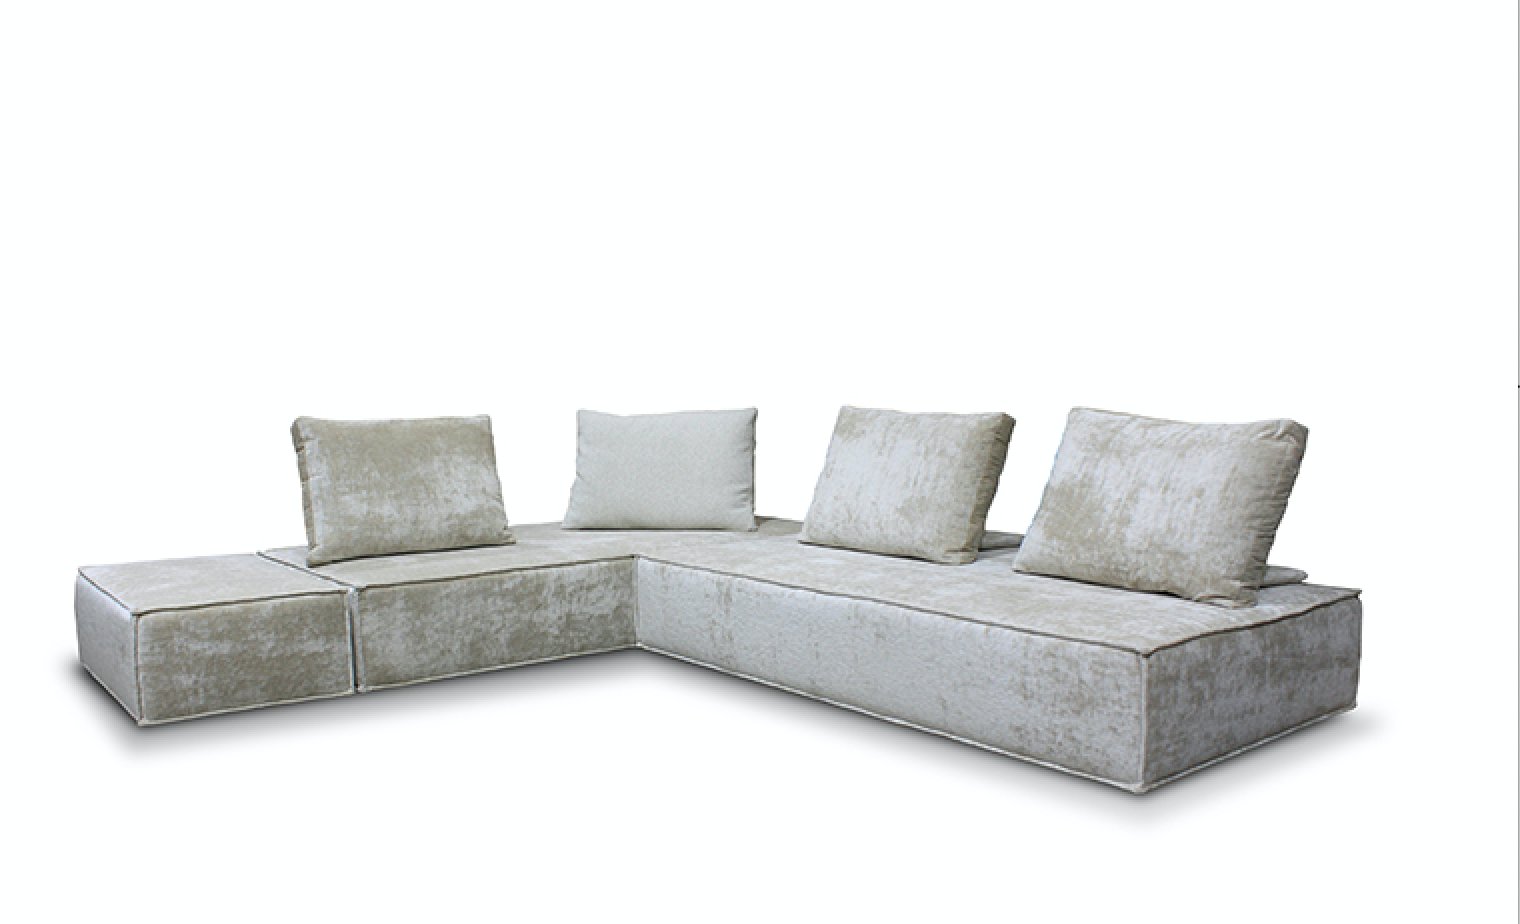 TULUM CHILL SECTIONAL SOFA living-homeaccents PEREZ   